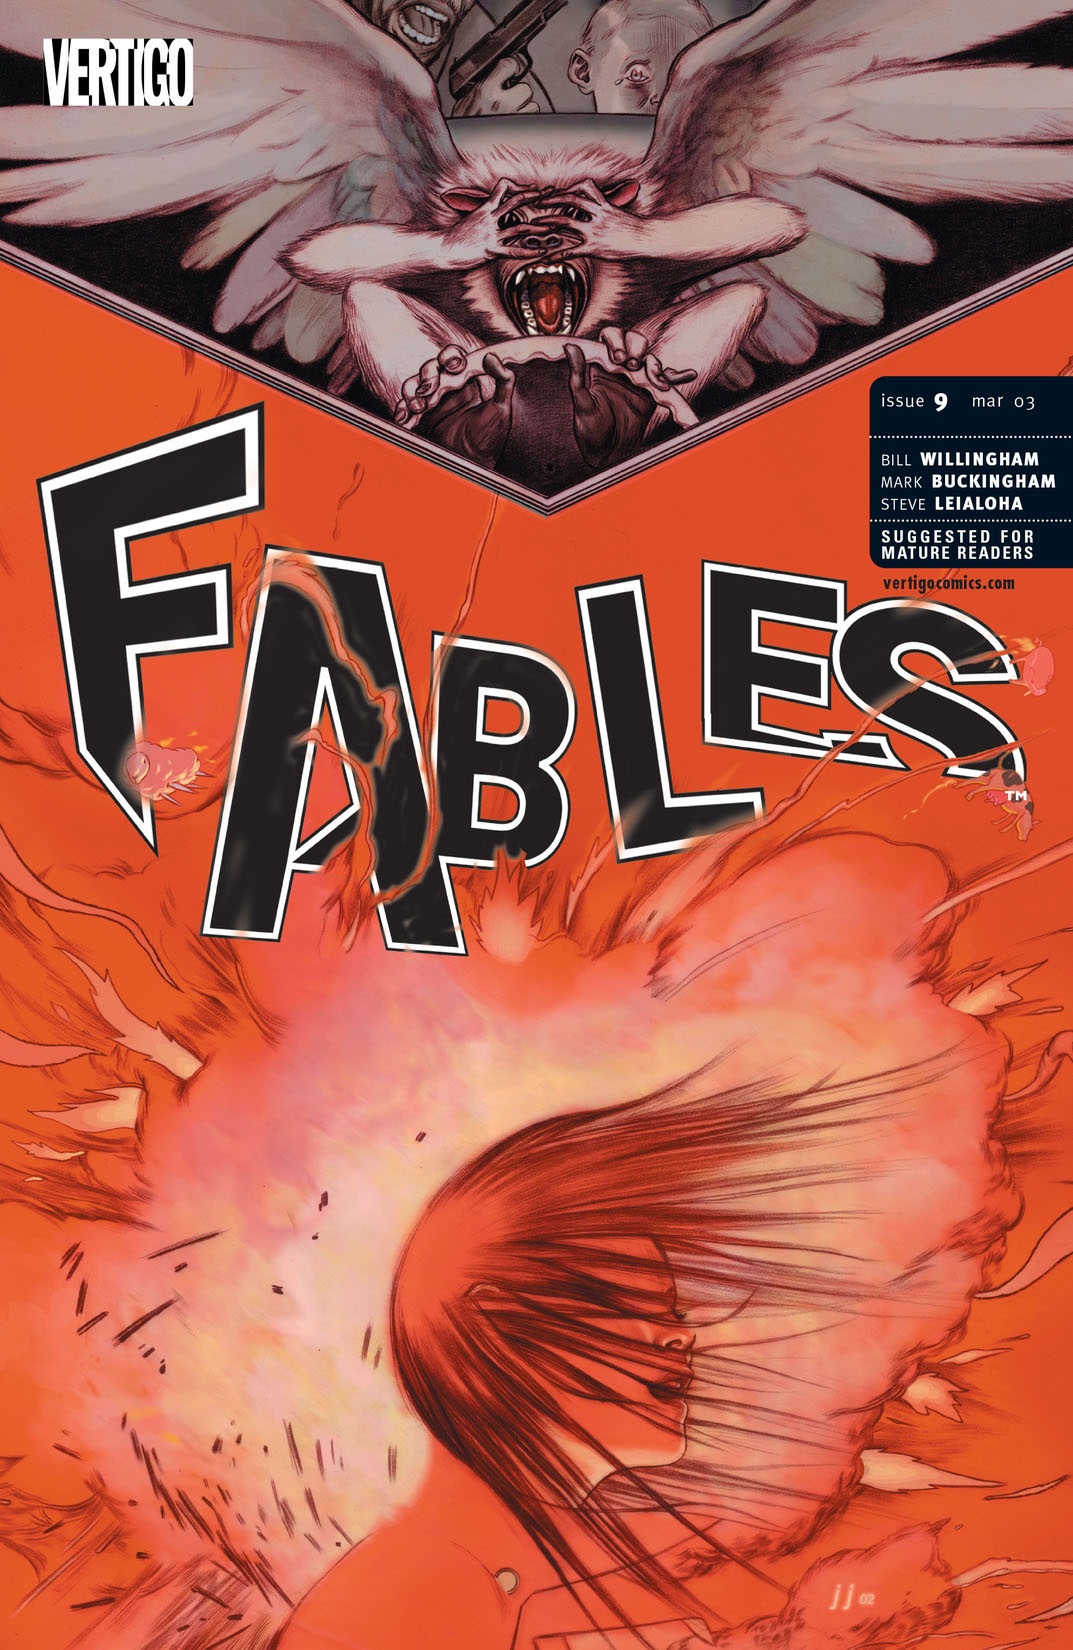 Fables #9 preview images